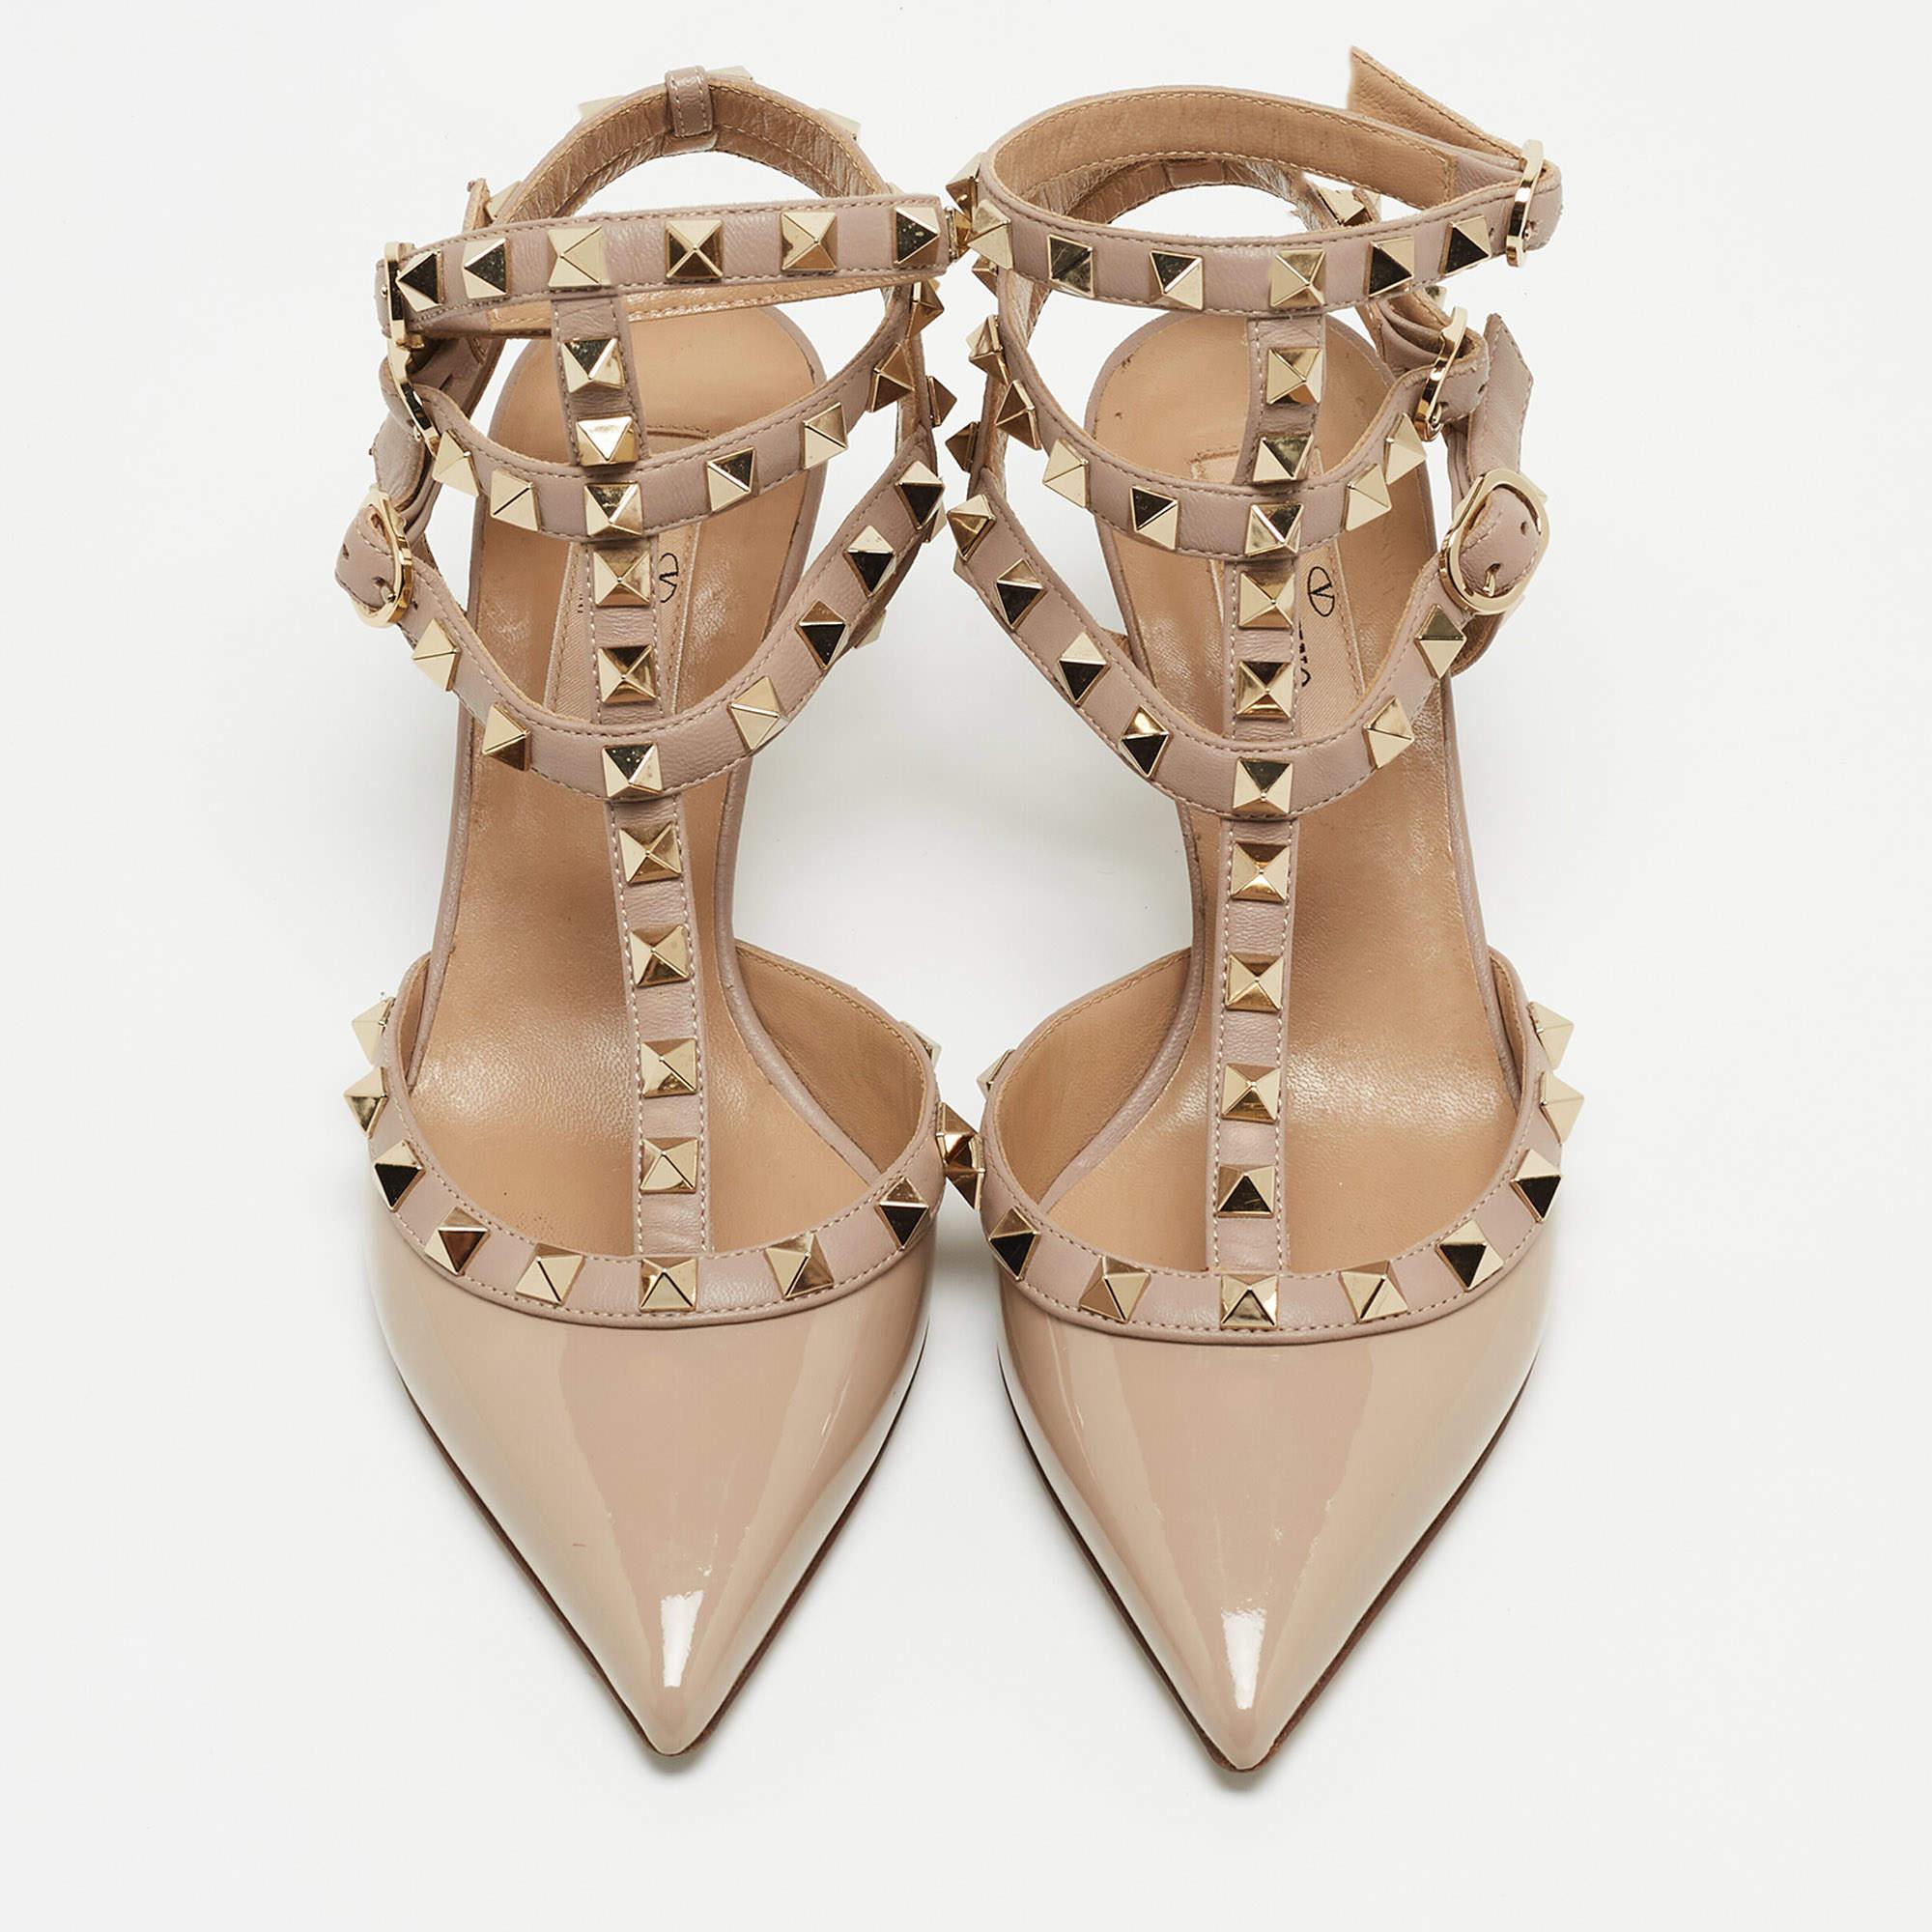 The elegantly placed Rockstuds on the outline of this pair of Valentino pumps makes it captivating. Crafted from leather, it is perfectly raised on 11cm heels and cut into a pointed-toe silhouette.

